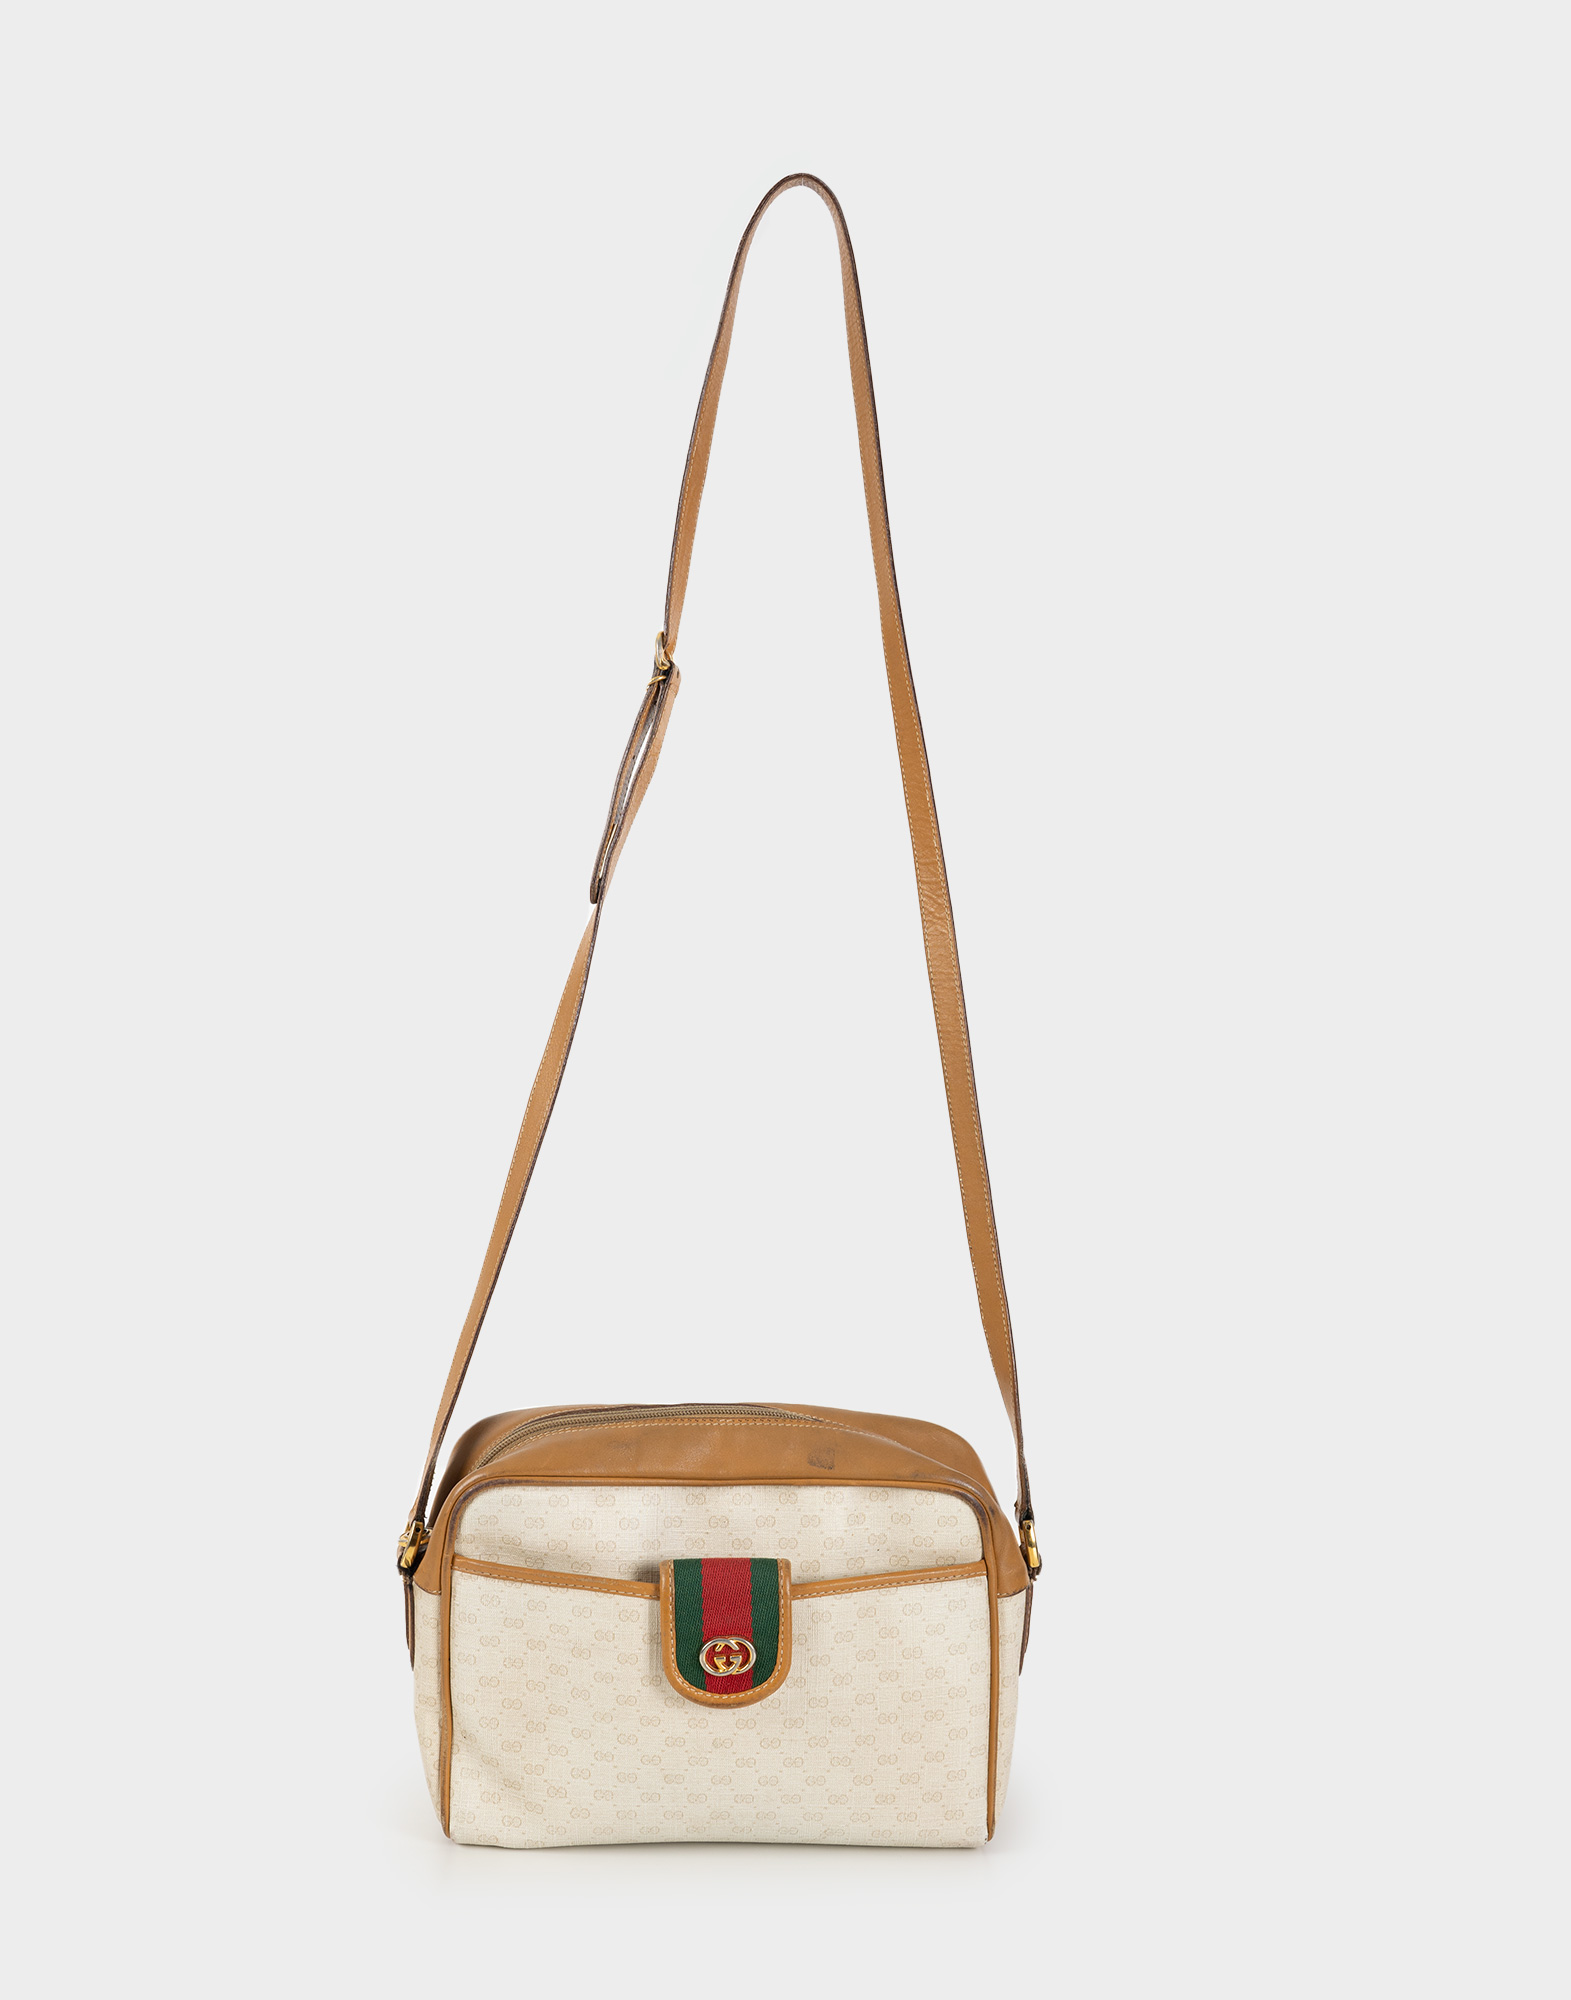 gucci women's shoulder bag with beige bottom and monogram print